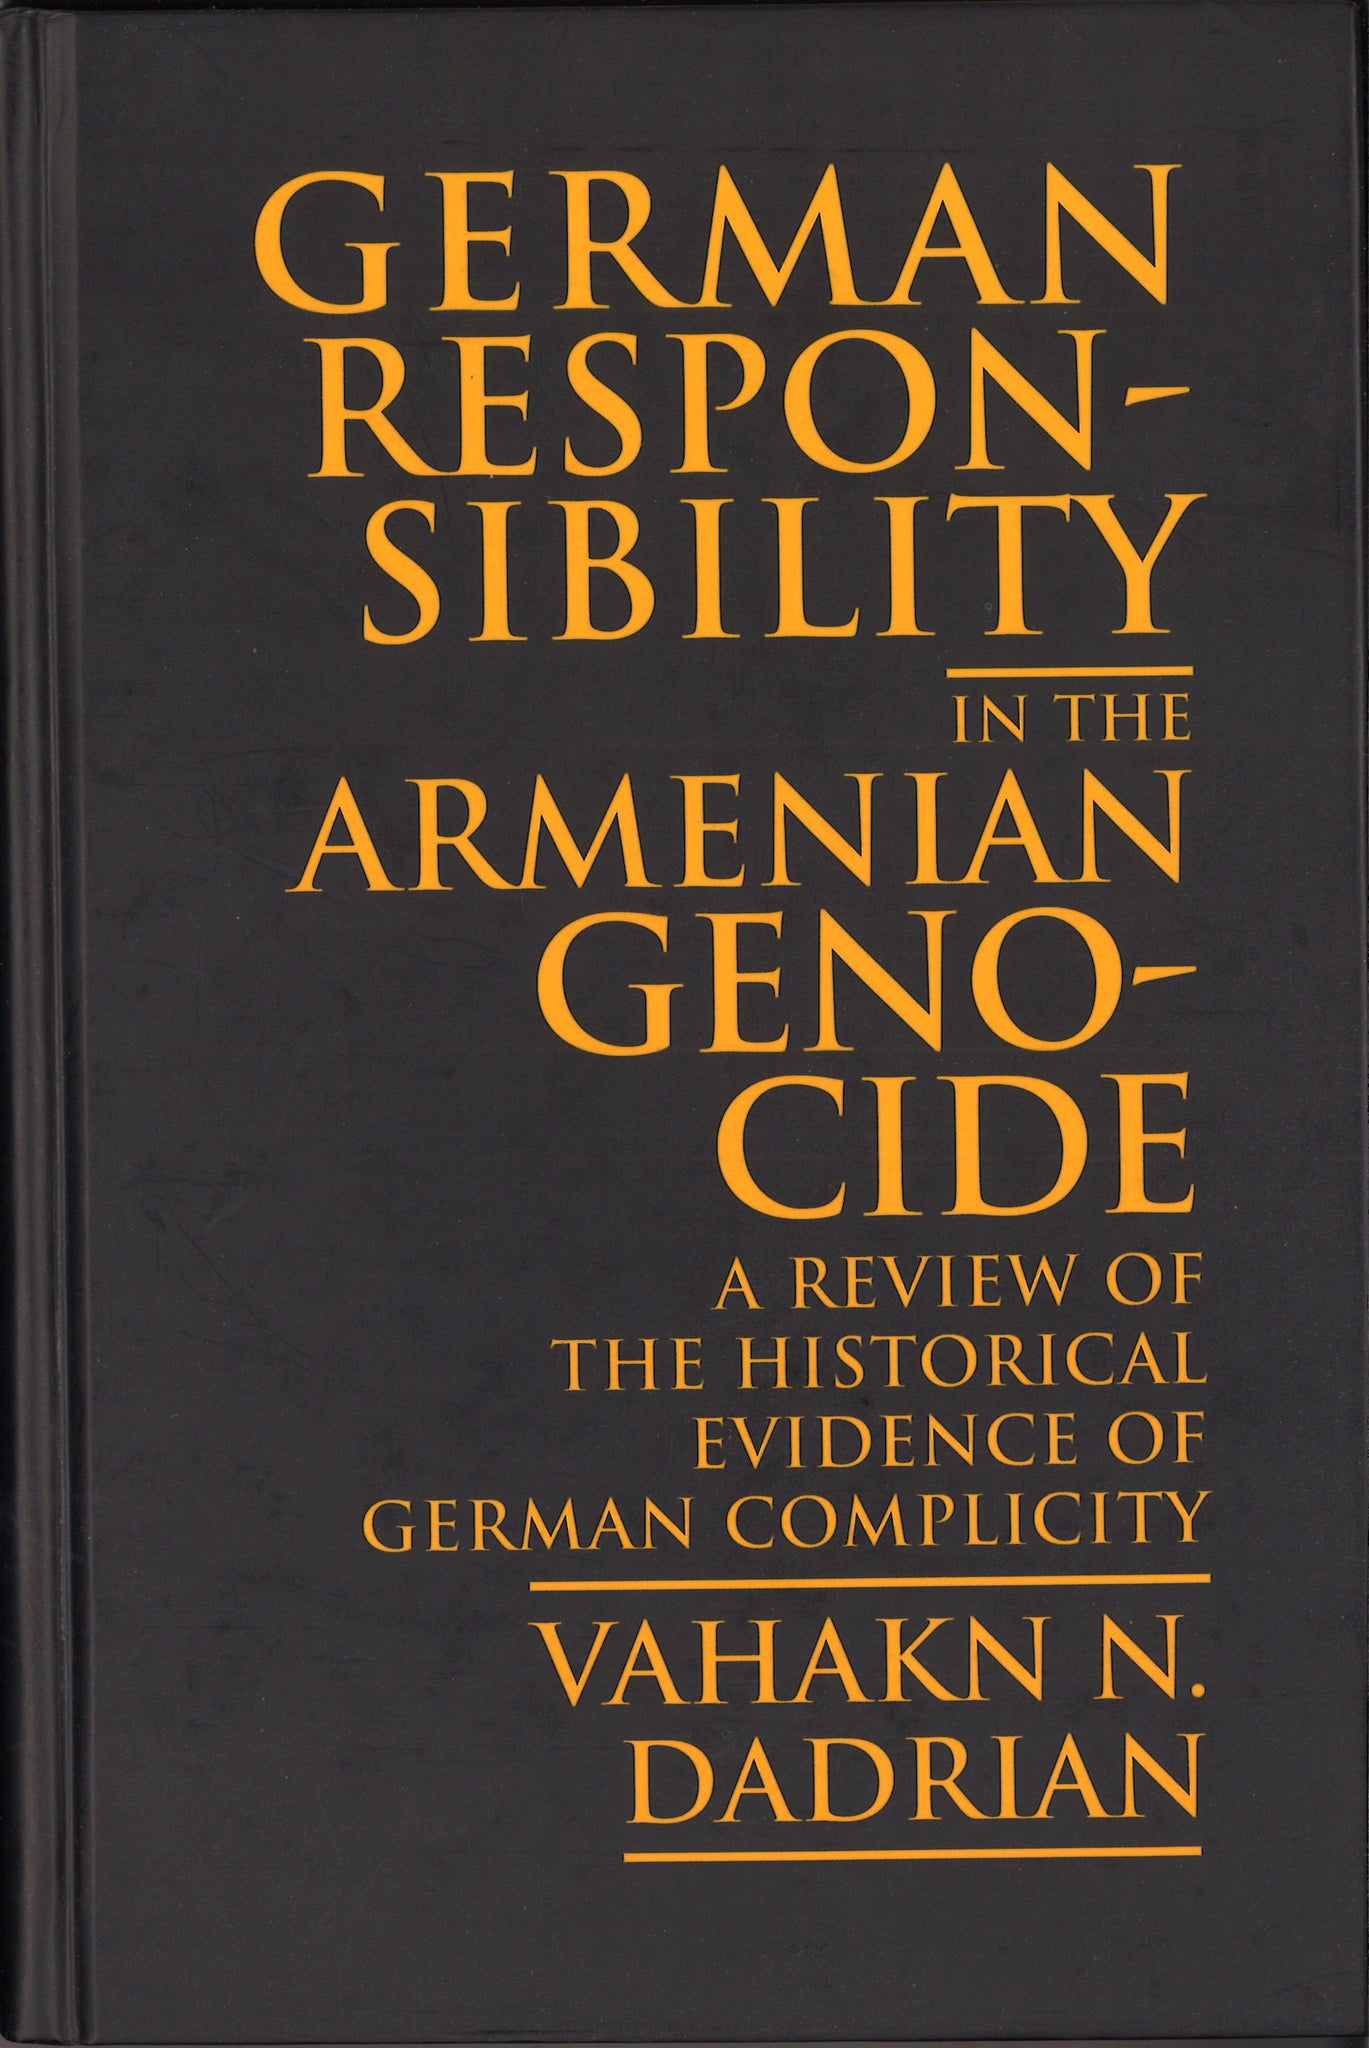 GERMAN RESPONSIBILITY IN THE ARMENIAN GENOCIDE, Review of the Historical Evidence of German Complicity